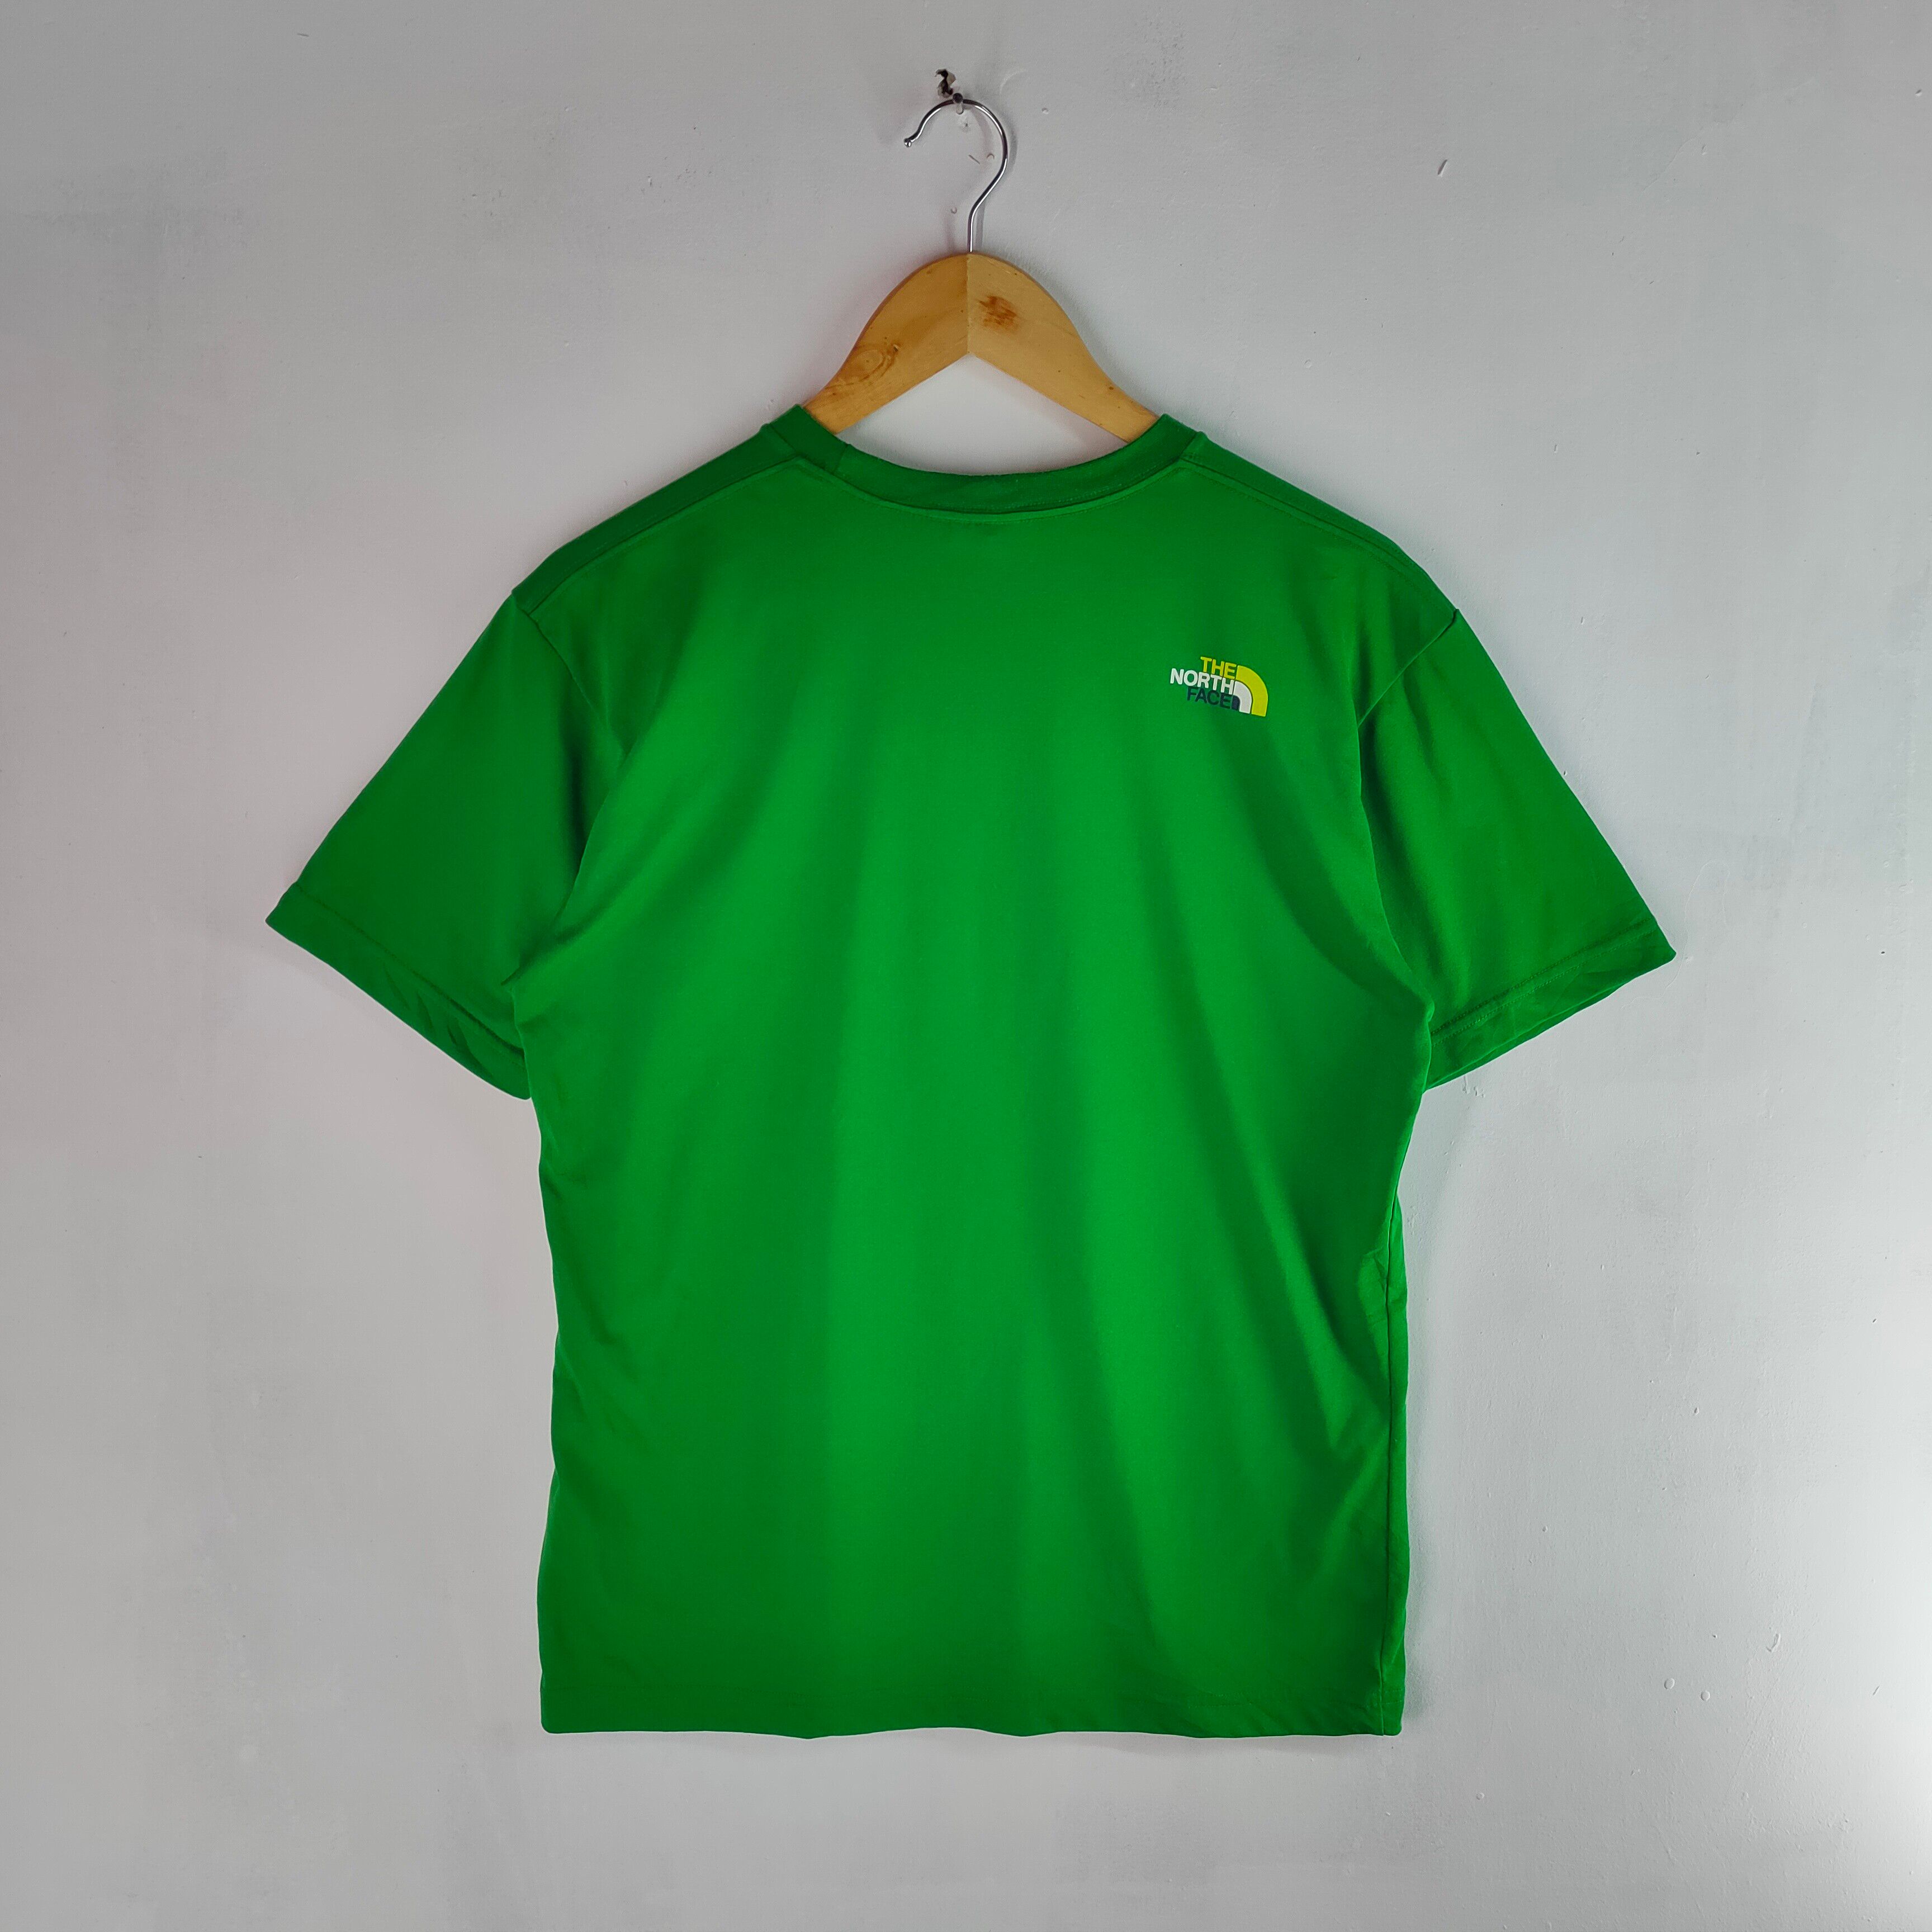 THE NORTH FACE Quick Dry Big Logo Colourful Shirt - 4